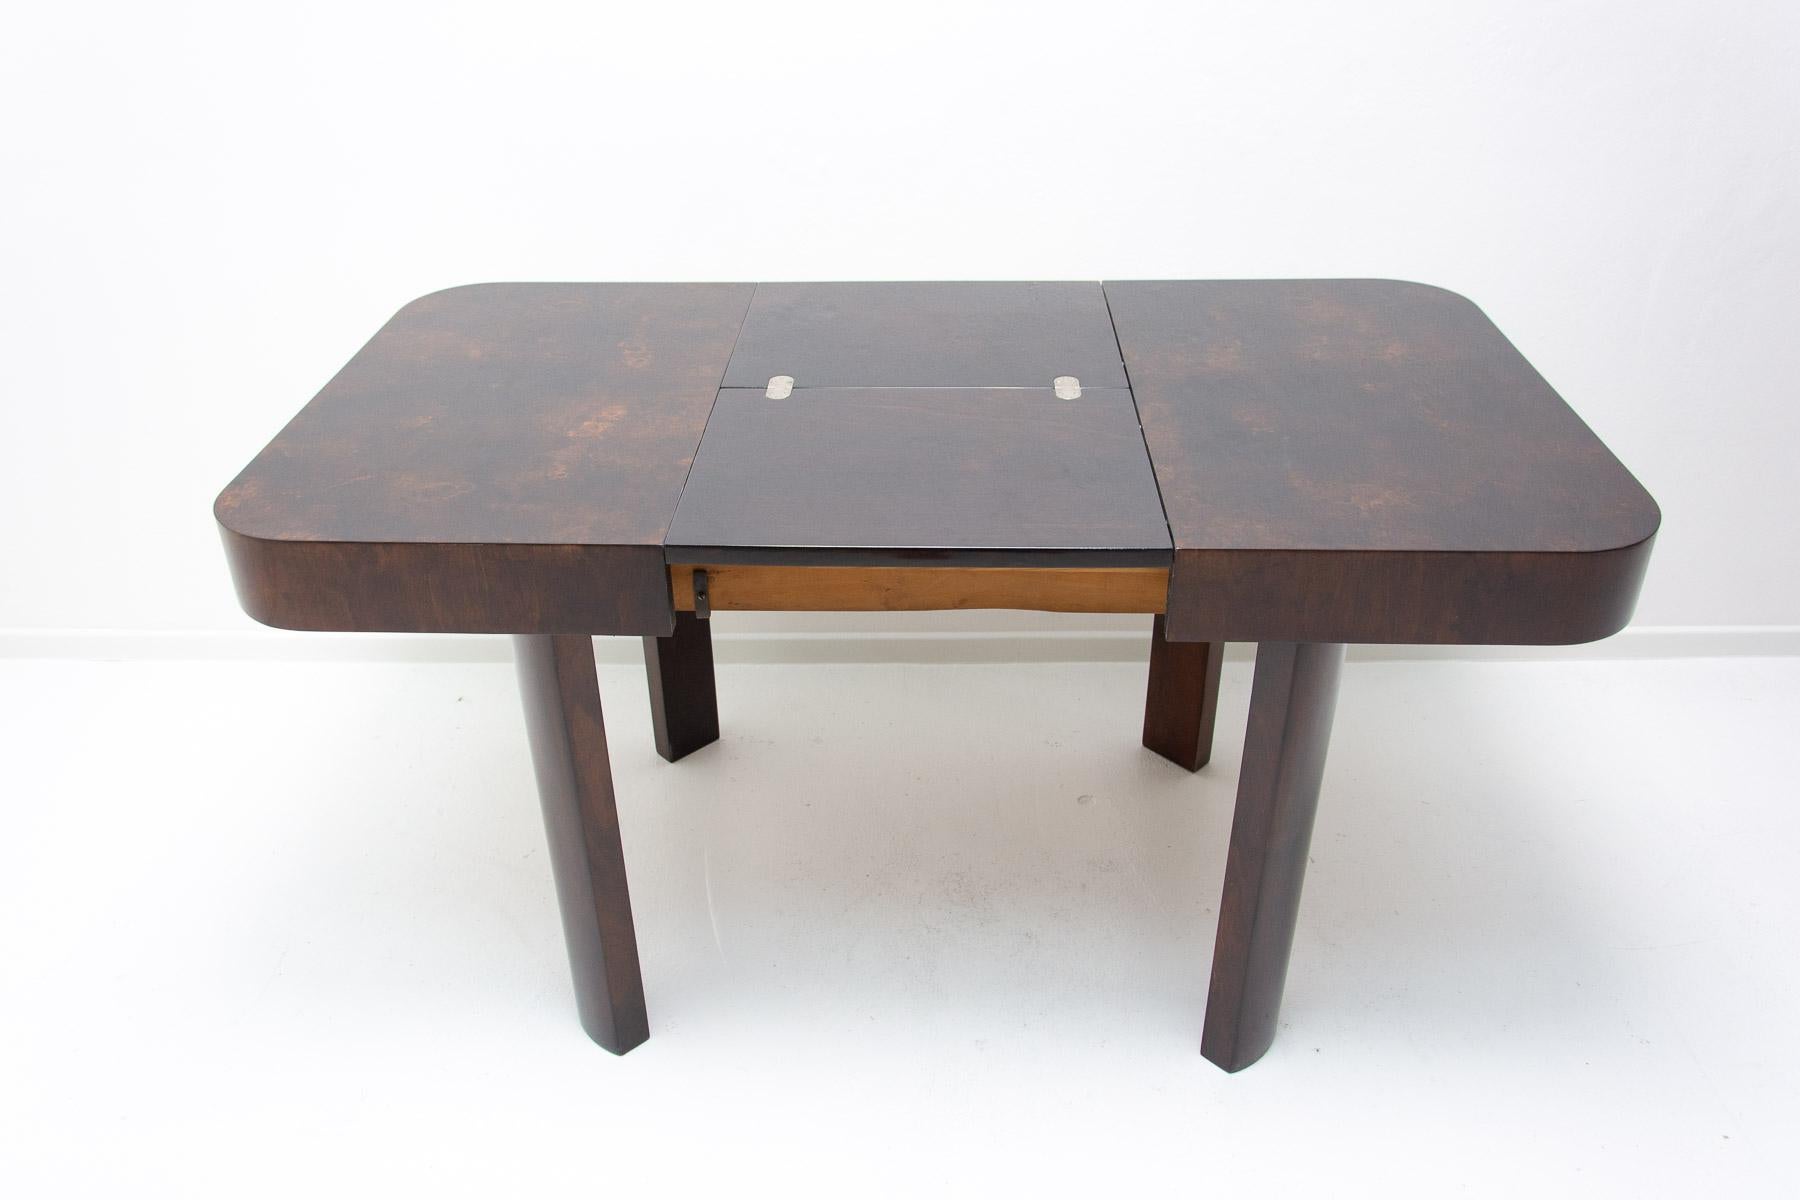  Midcentury Fully renovated adjustable walnut dining table by Jindrich Halabala. 7